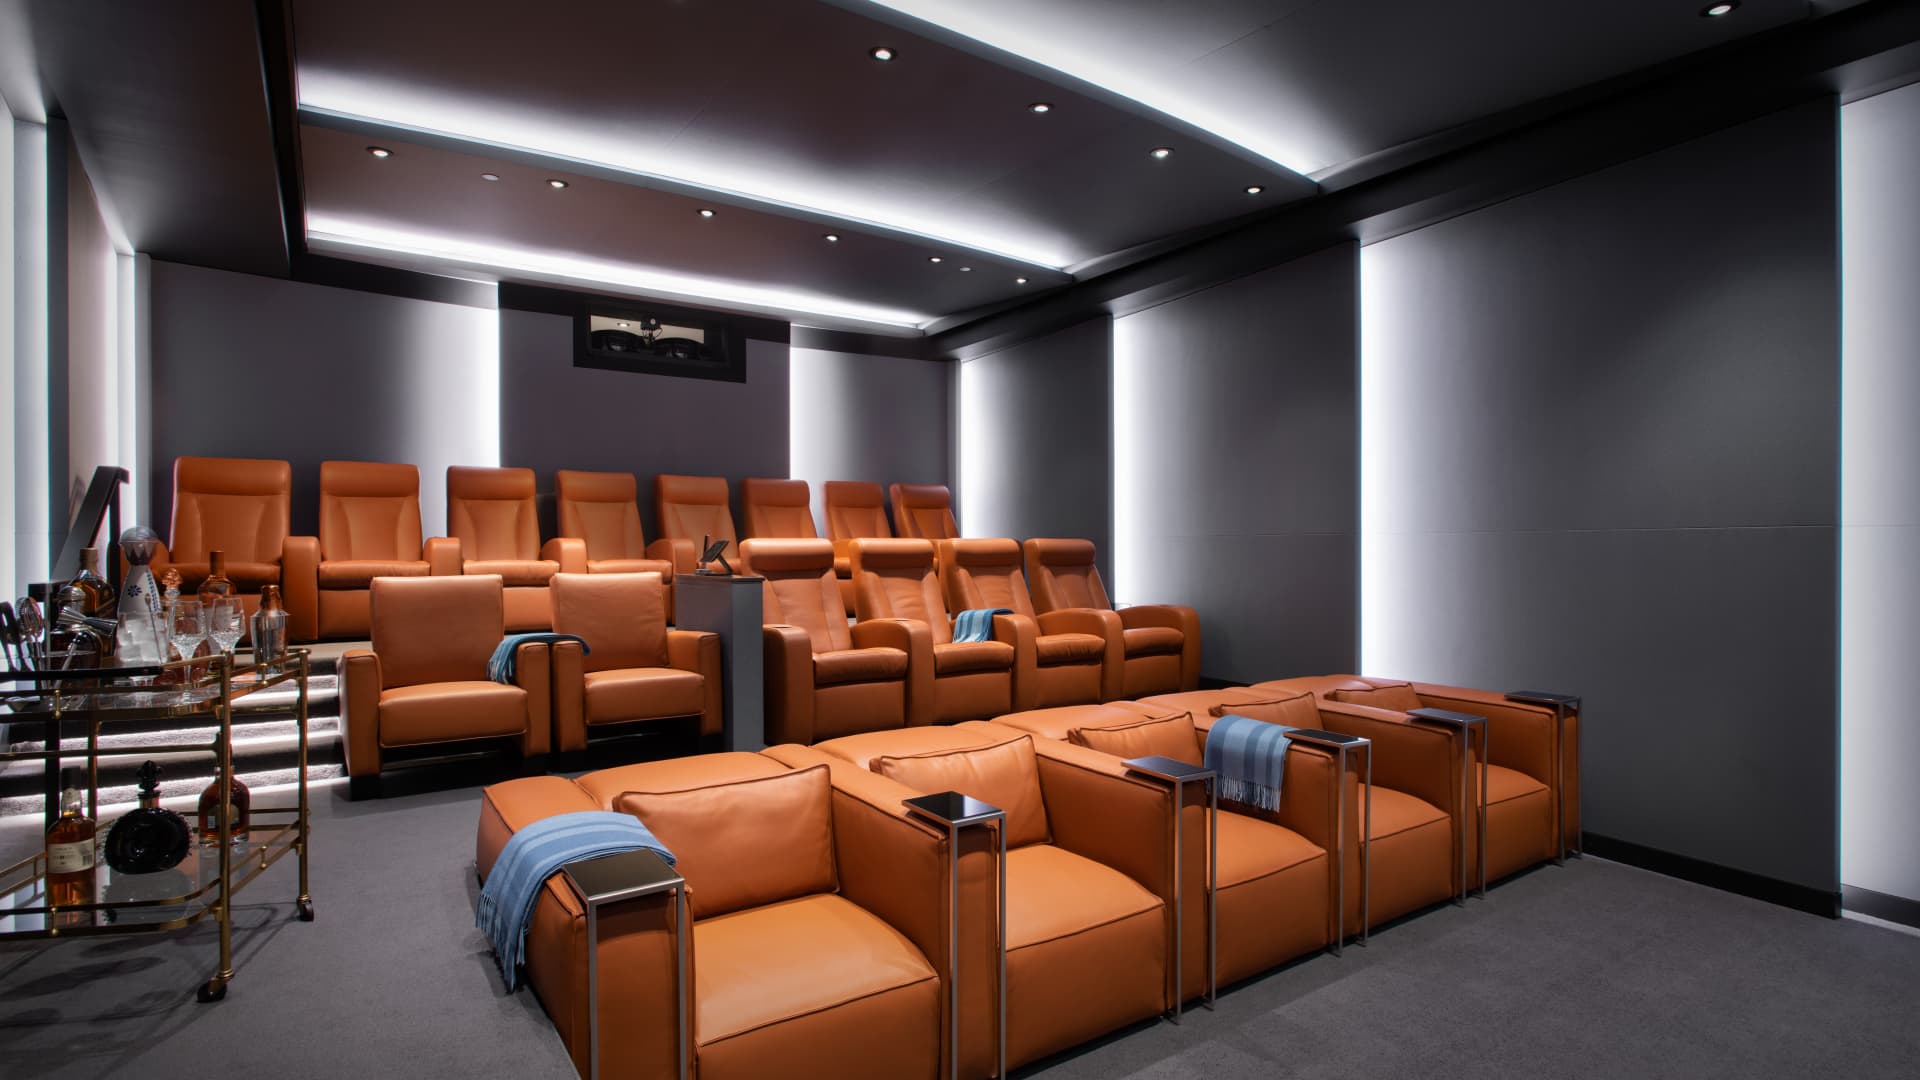 A 19-person IMAX theater is one of the luxe amenities offered at the Four Seasons Private Residences Los Angeles.